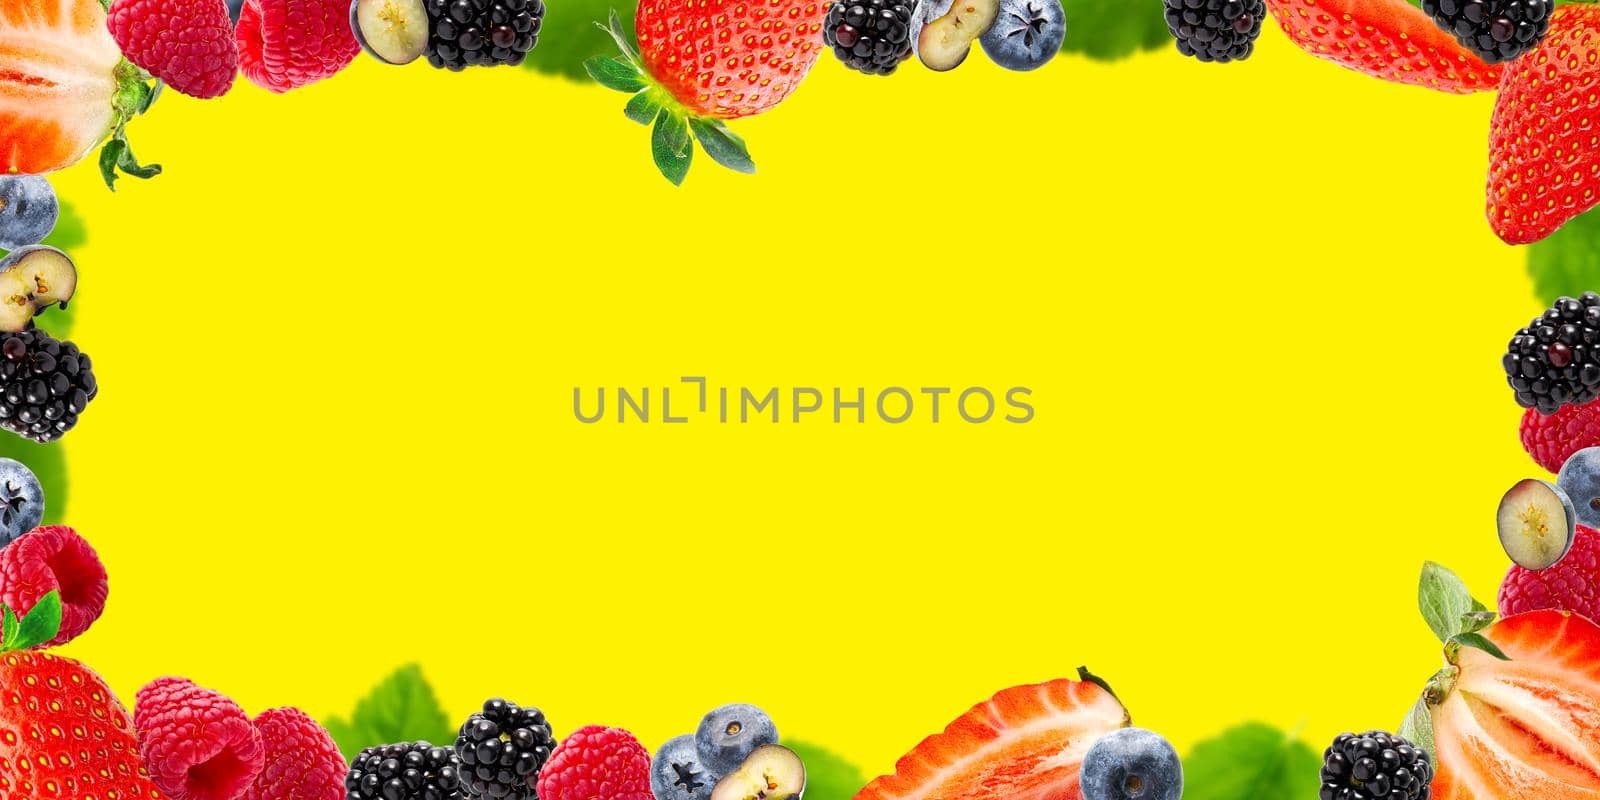 Berries Frame on white Background. Strawberry, Blueberry, Raspberries, and Blackberry. by PhotoTime